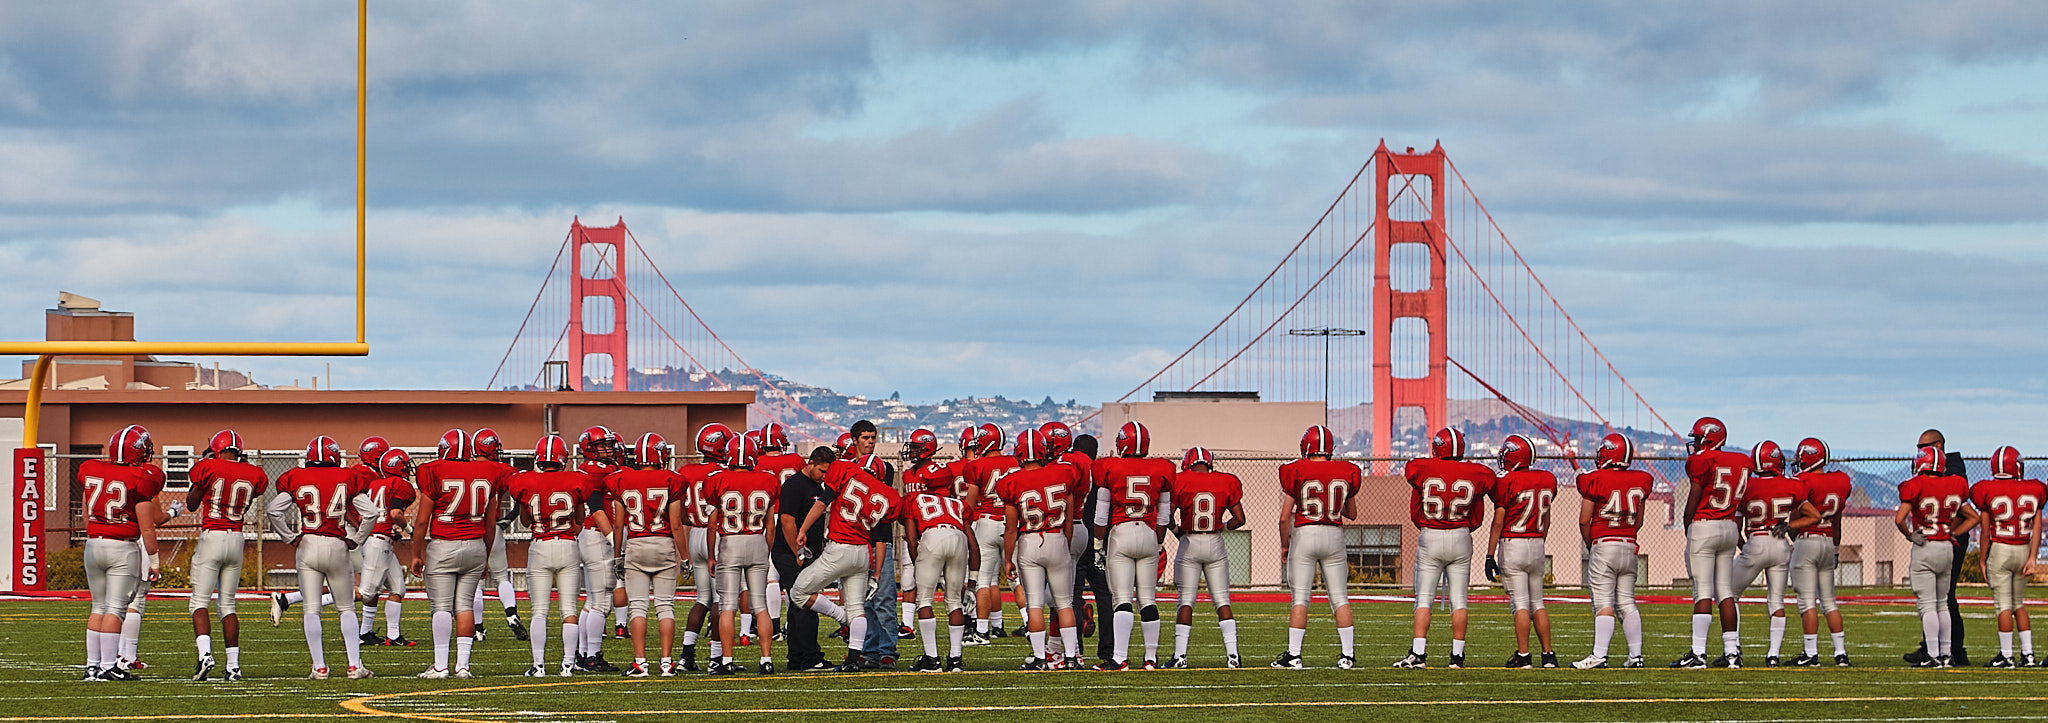 Football by the Golden Gate